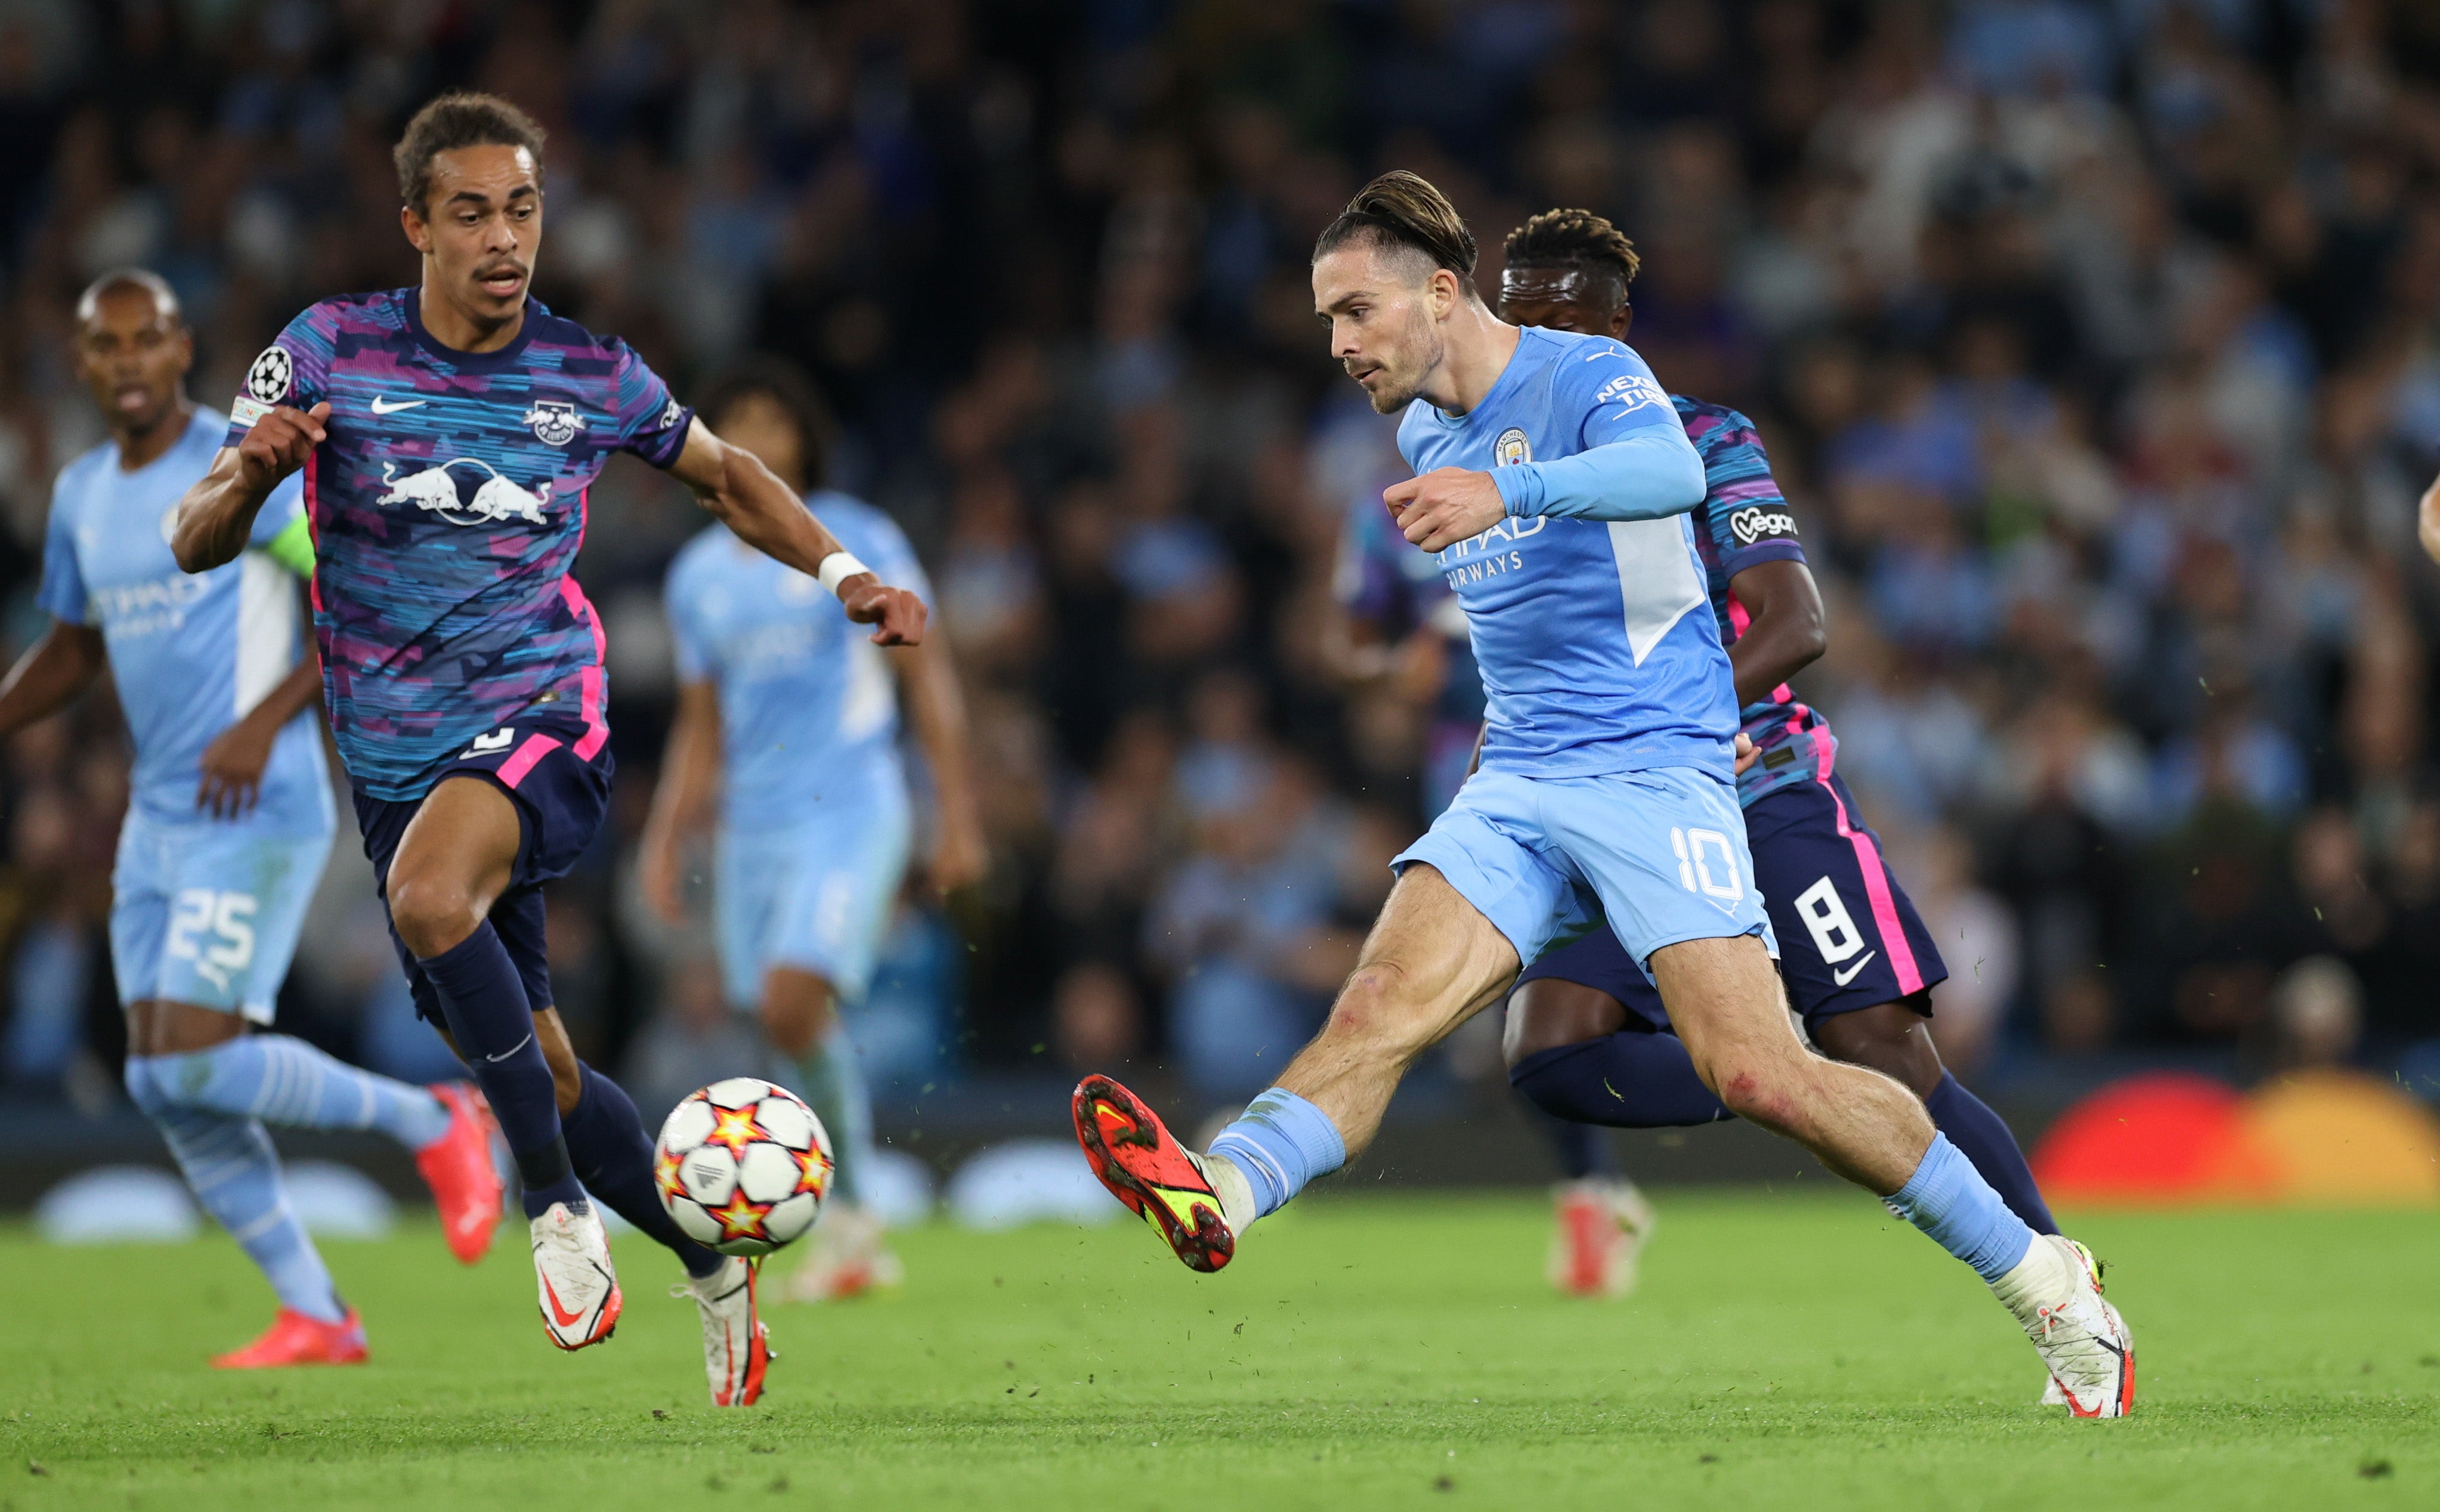 Jack Grealish playing for Manchester City against RB Leipzig in the Champions League